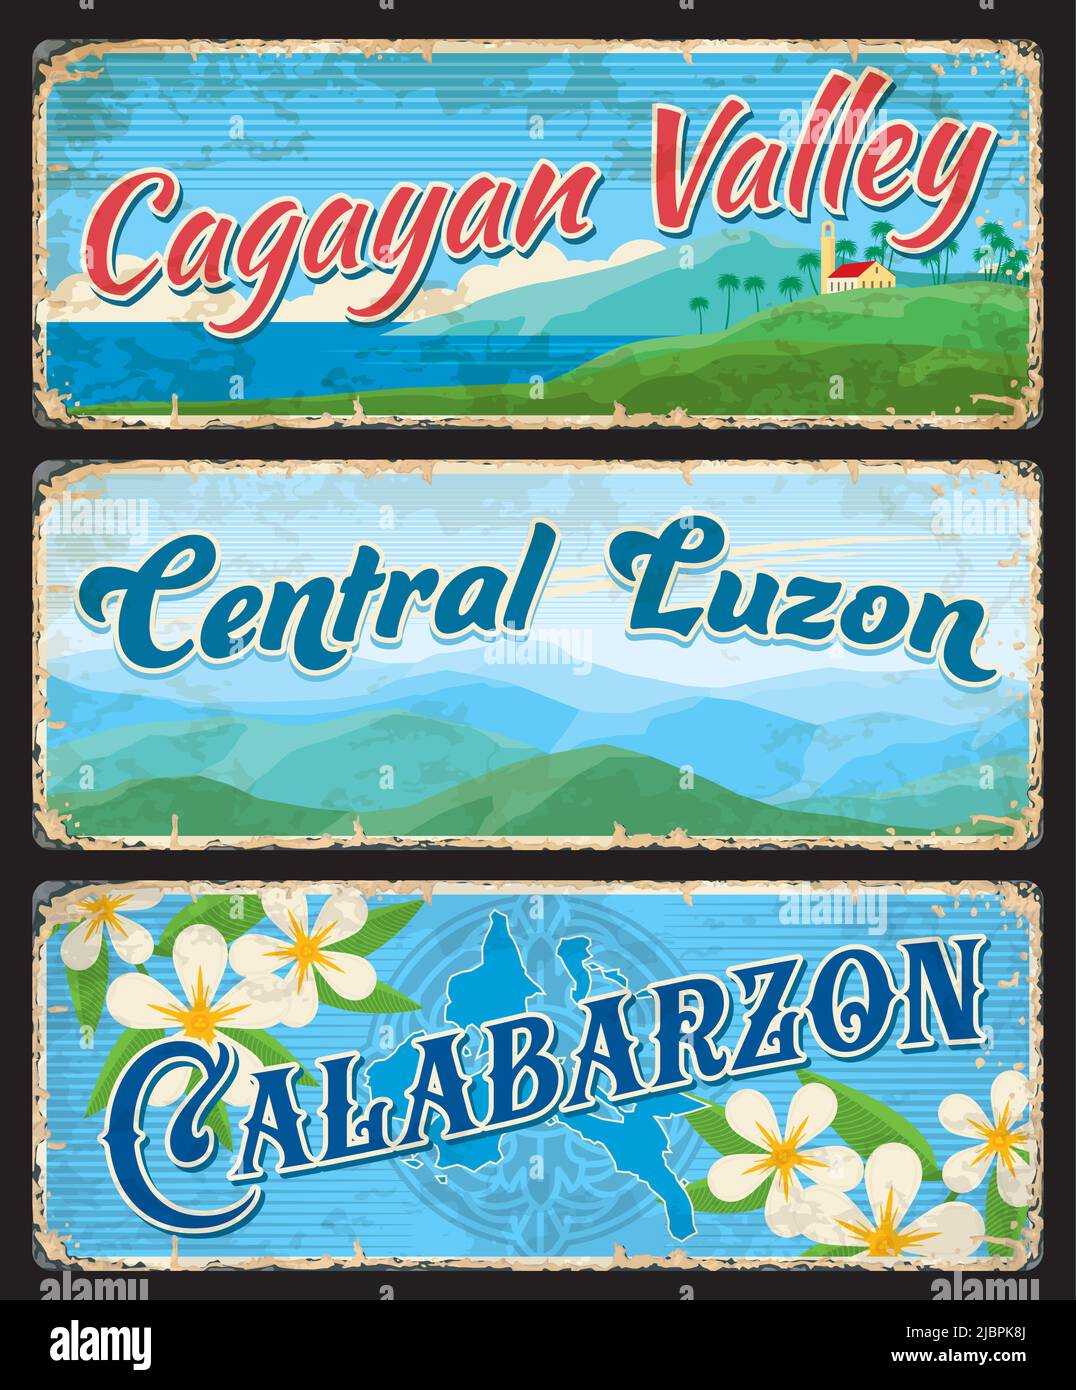 Central Luzon, Calabarzon and Cagayan Valley, provinces of Philippines, vector travel plates and stickers. Philippines provinces and regions tin signs or tourism luggage tags with landmarks Stock Vector